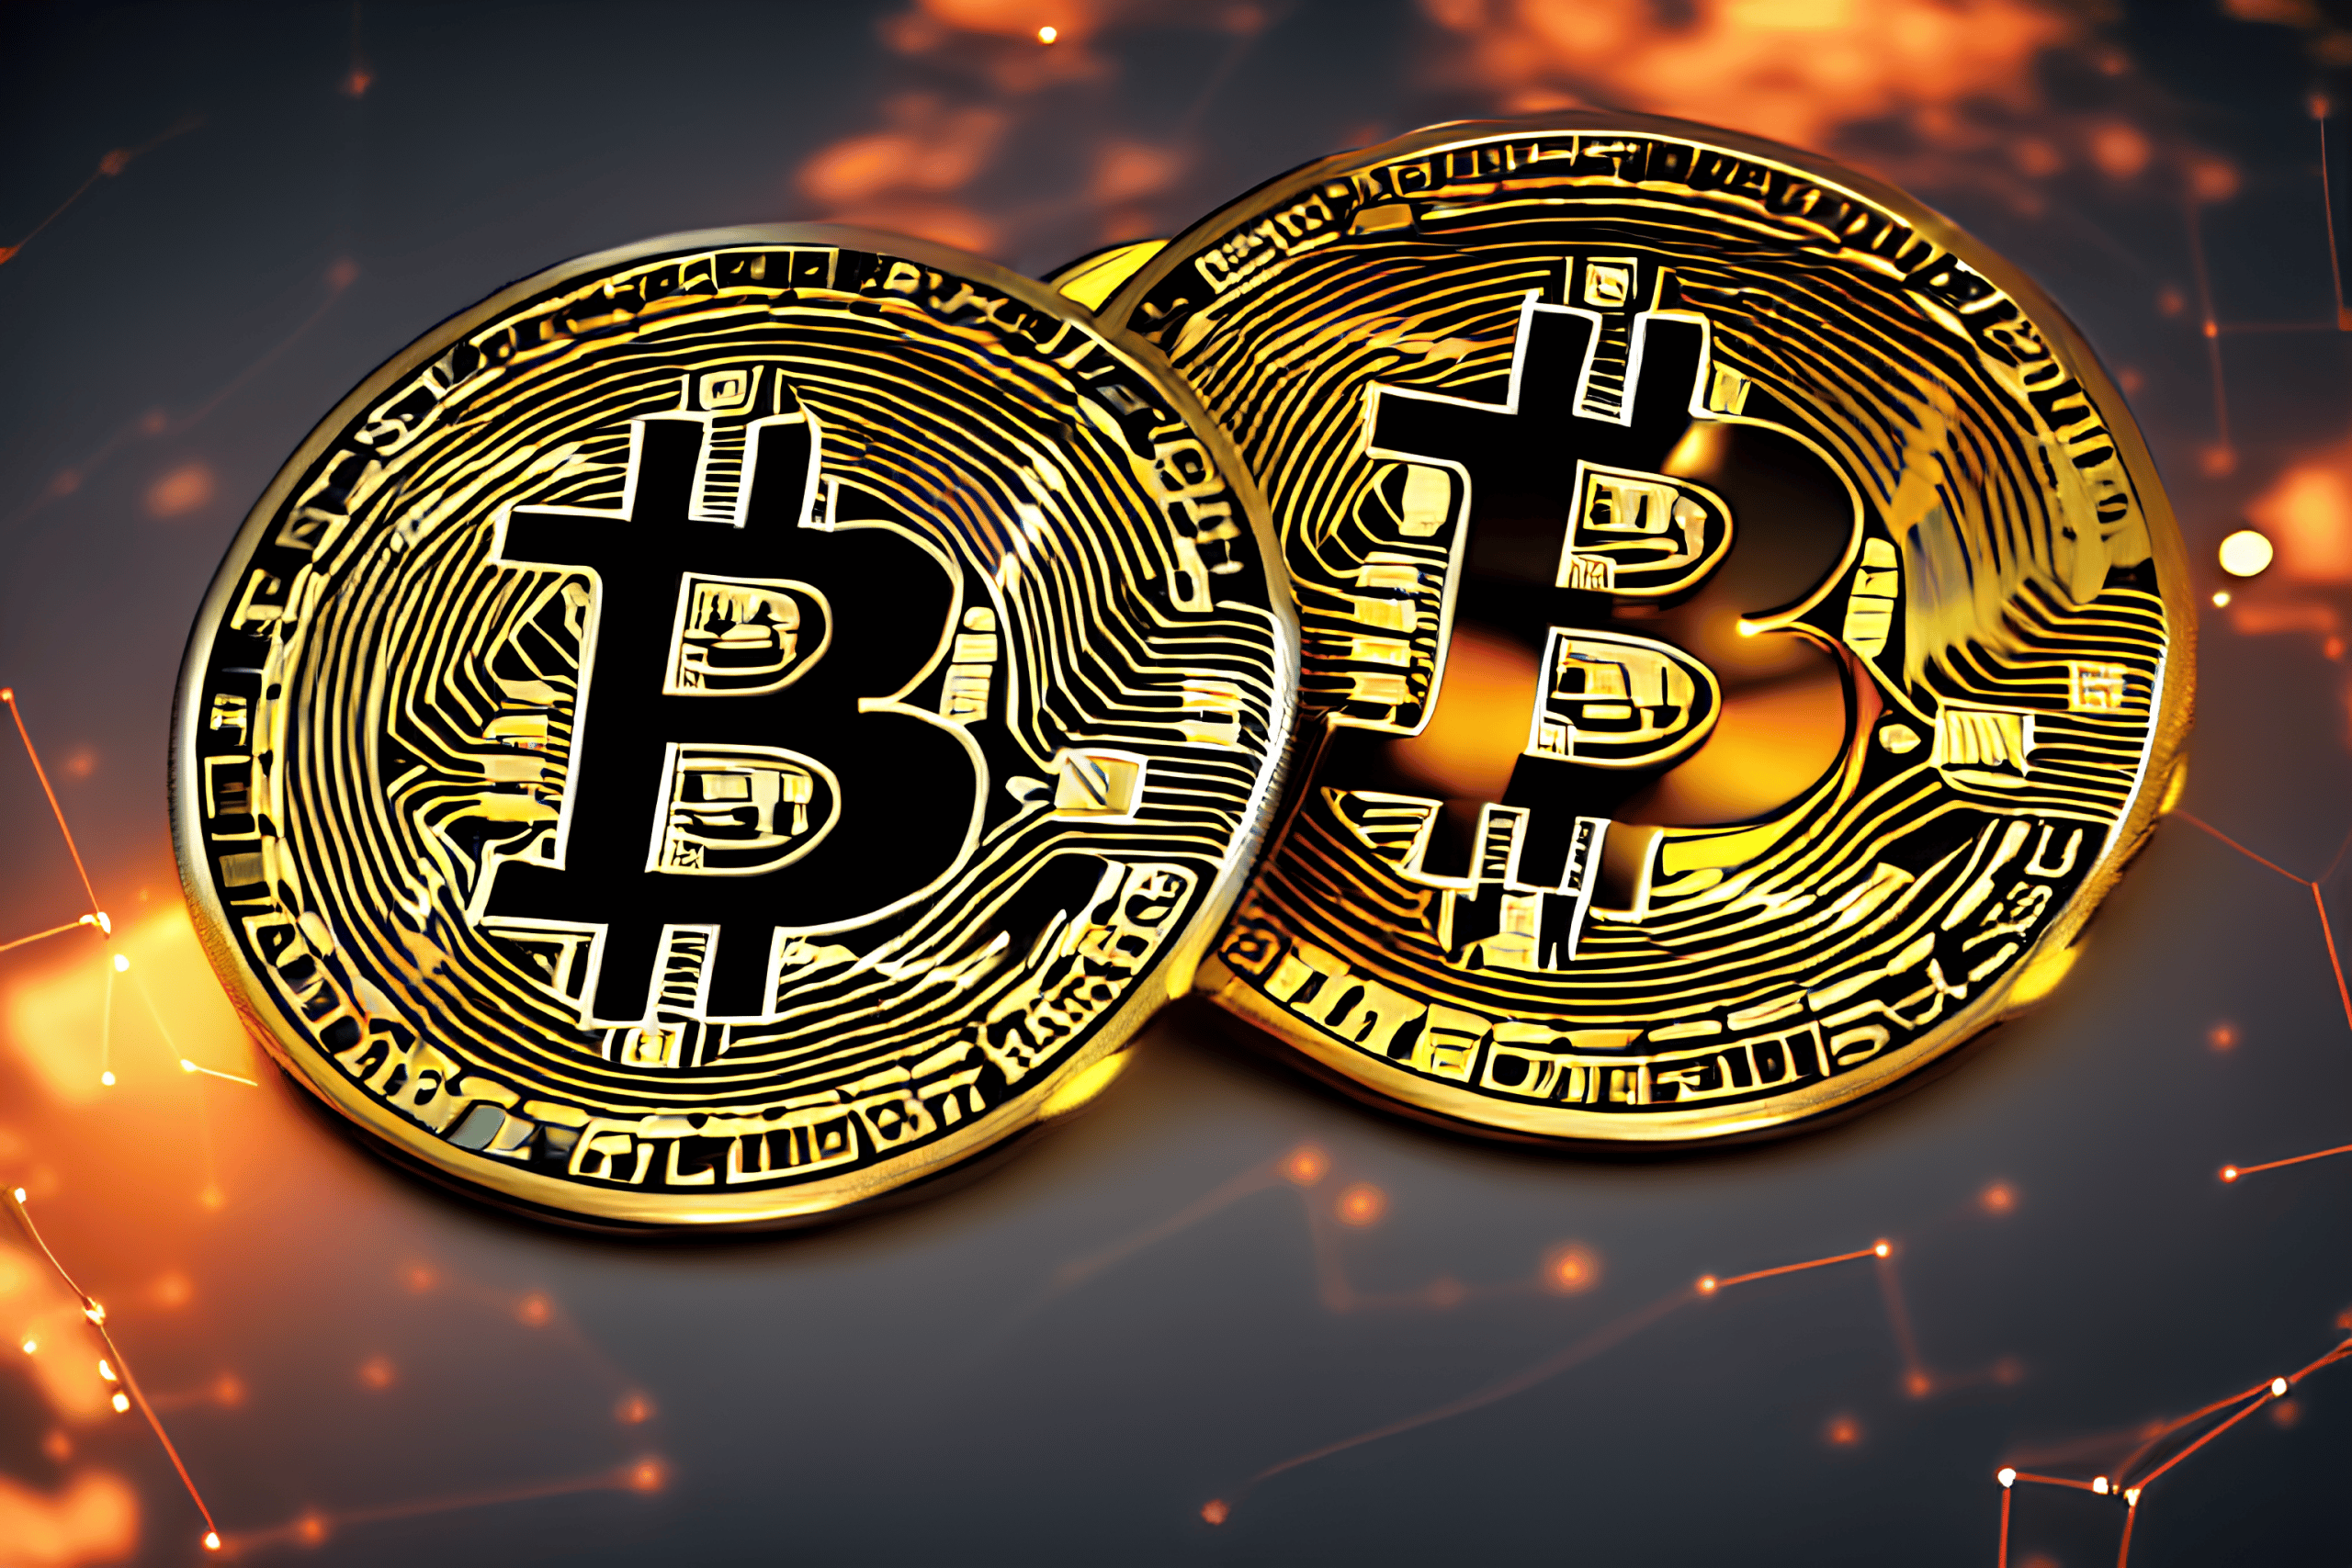 This Bitcoin (BTC) Metric hits the 2020 level, an anticipation of a bull run? Decoding Details…